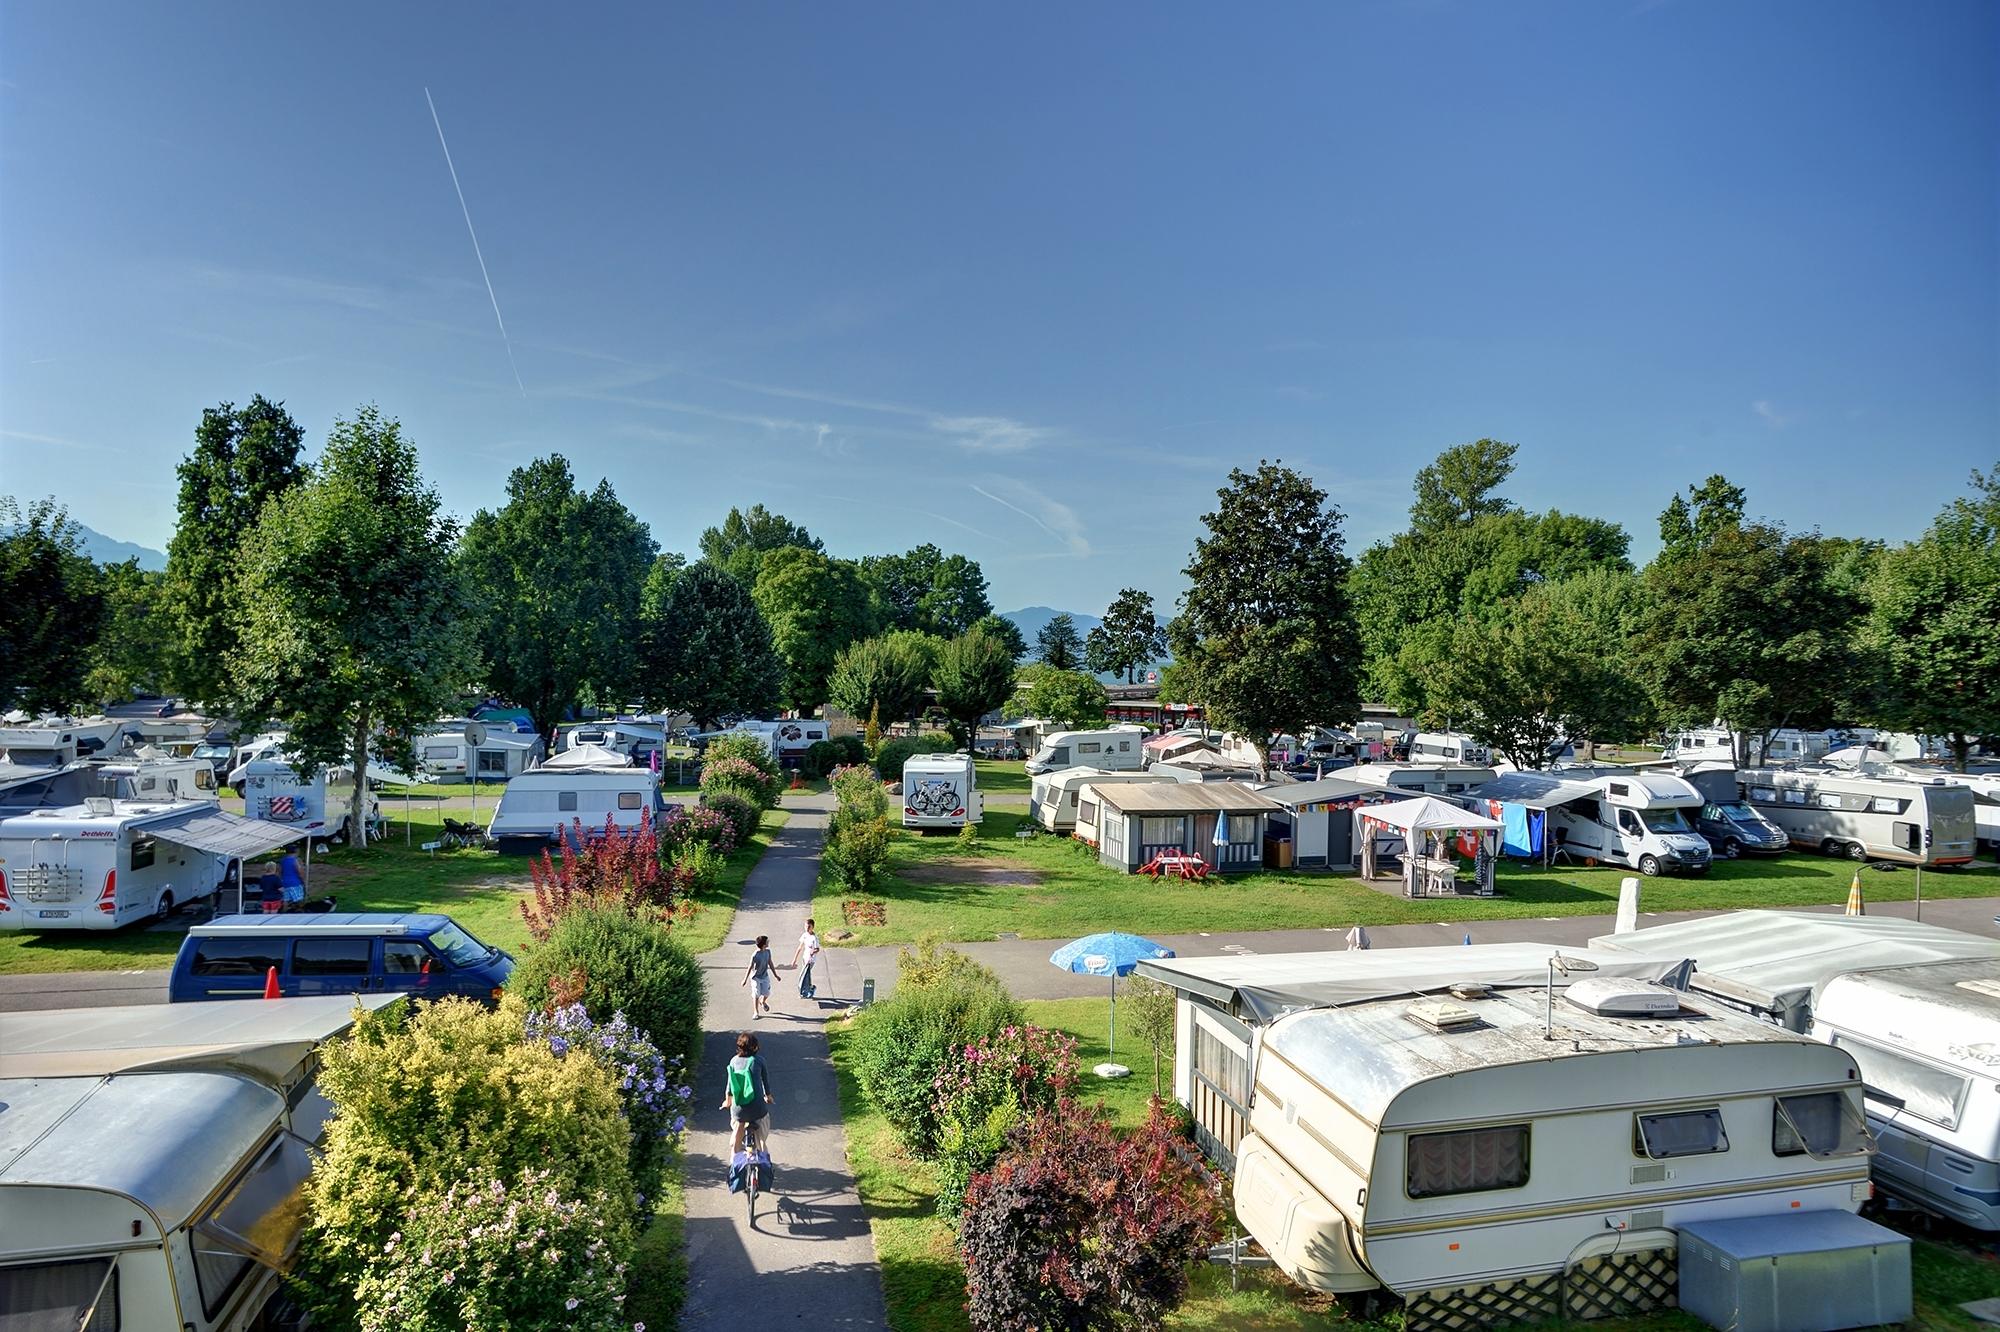 VD_Lausanne_Camping_Vidy_(6)